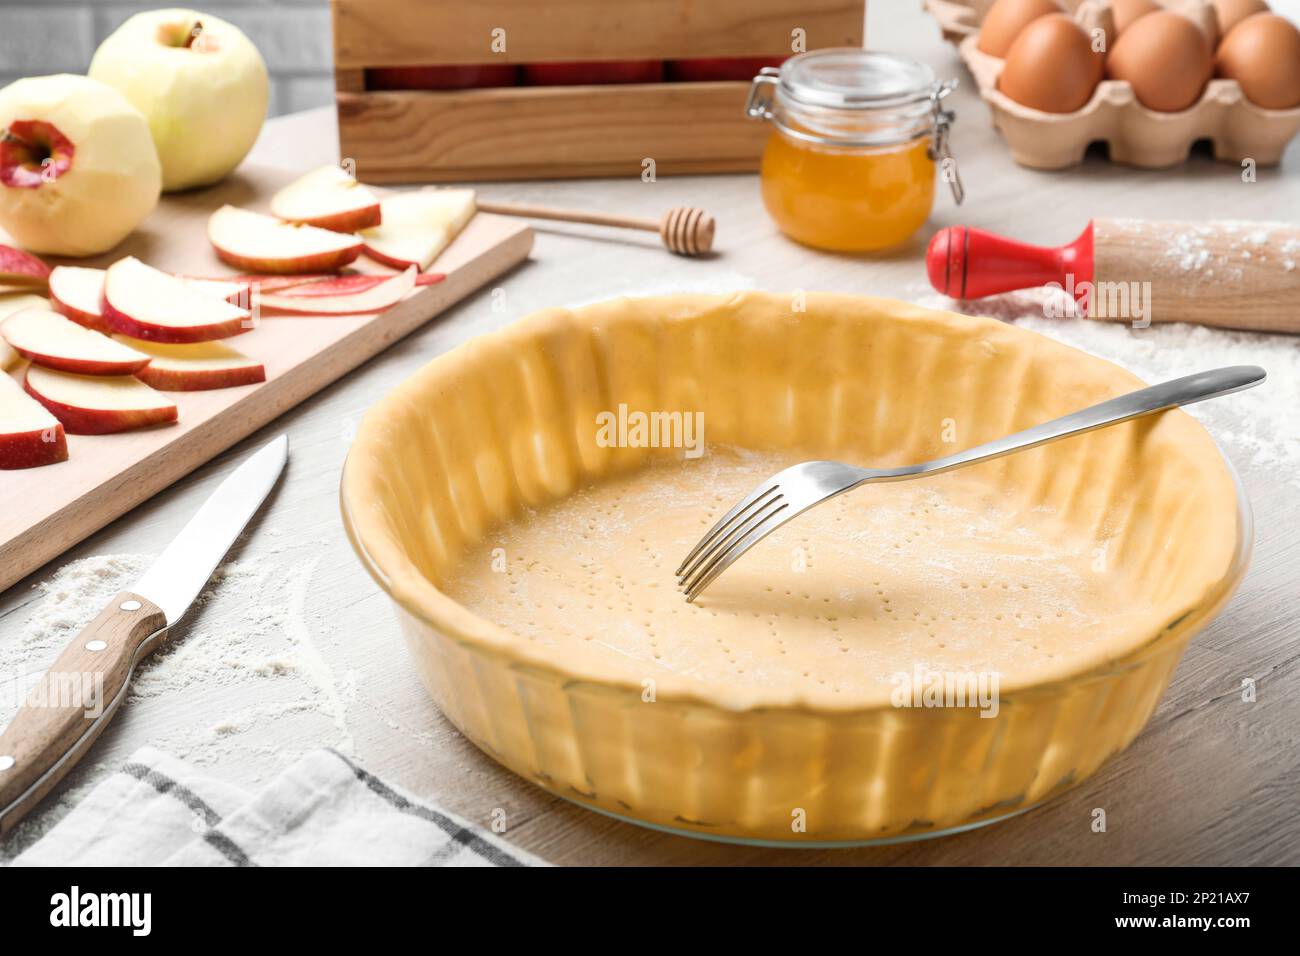 Raw dough with fork and ingredients on white wooden table. Baking apple pie Stock Photo